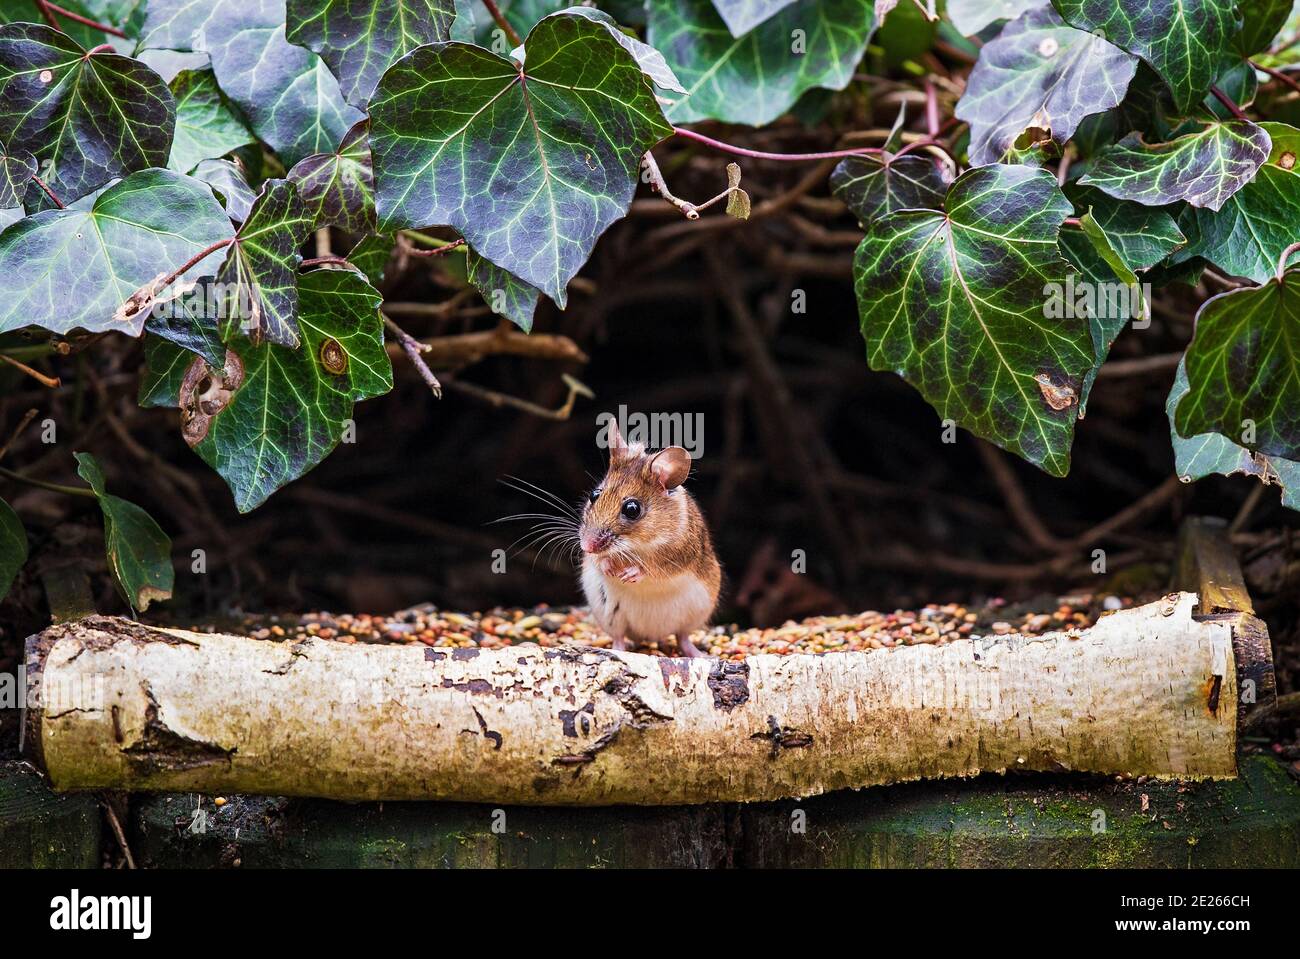 Wood Mouse (Apodemus sylvaticus) sitting and foraging at bird feeder, Hesse, Germany Stock Photo